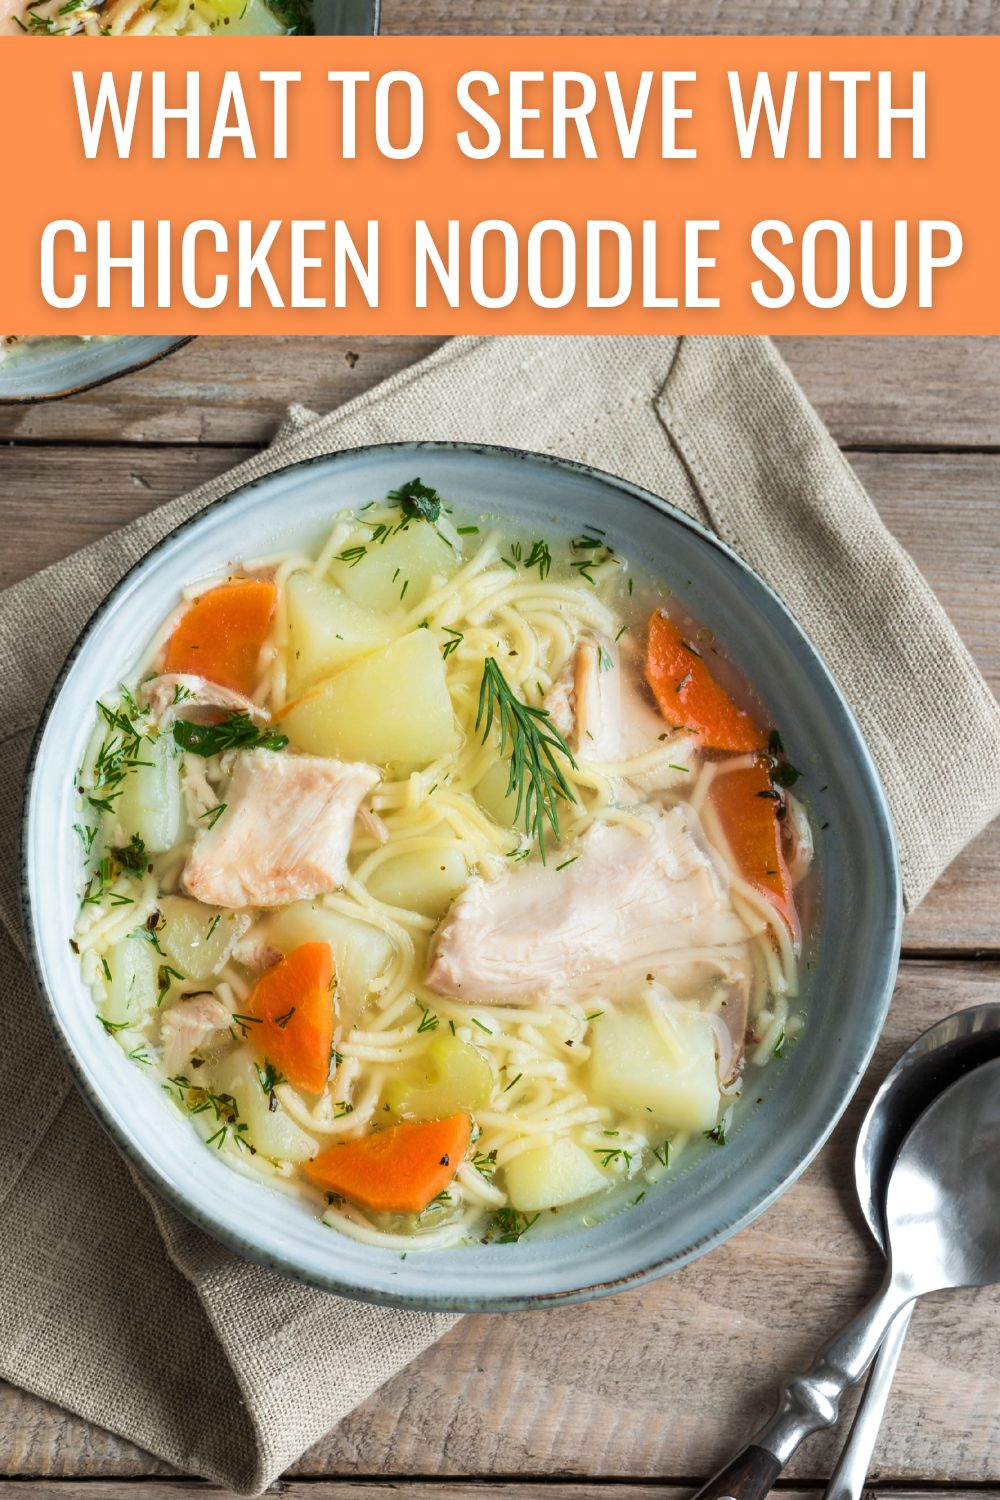 What to serve with chicken noodle soup.